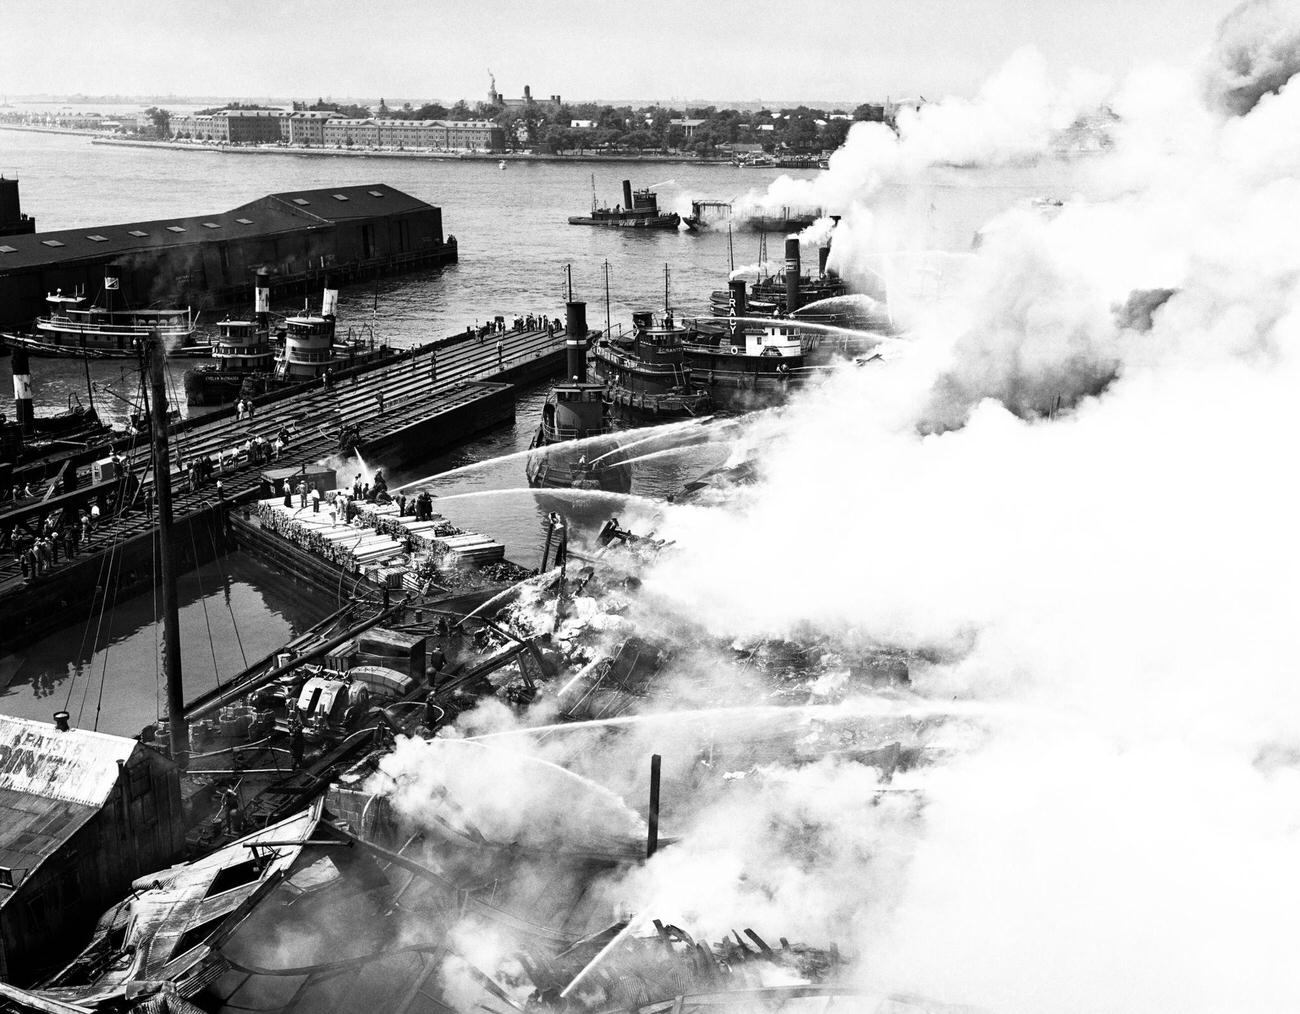 Fire At S.s. Panuco And Pier 27, Four Dead And 60 Injured, Brooklyn, August 1941